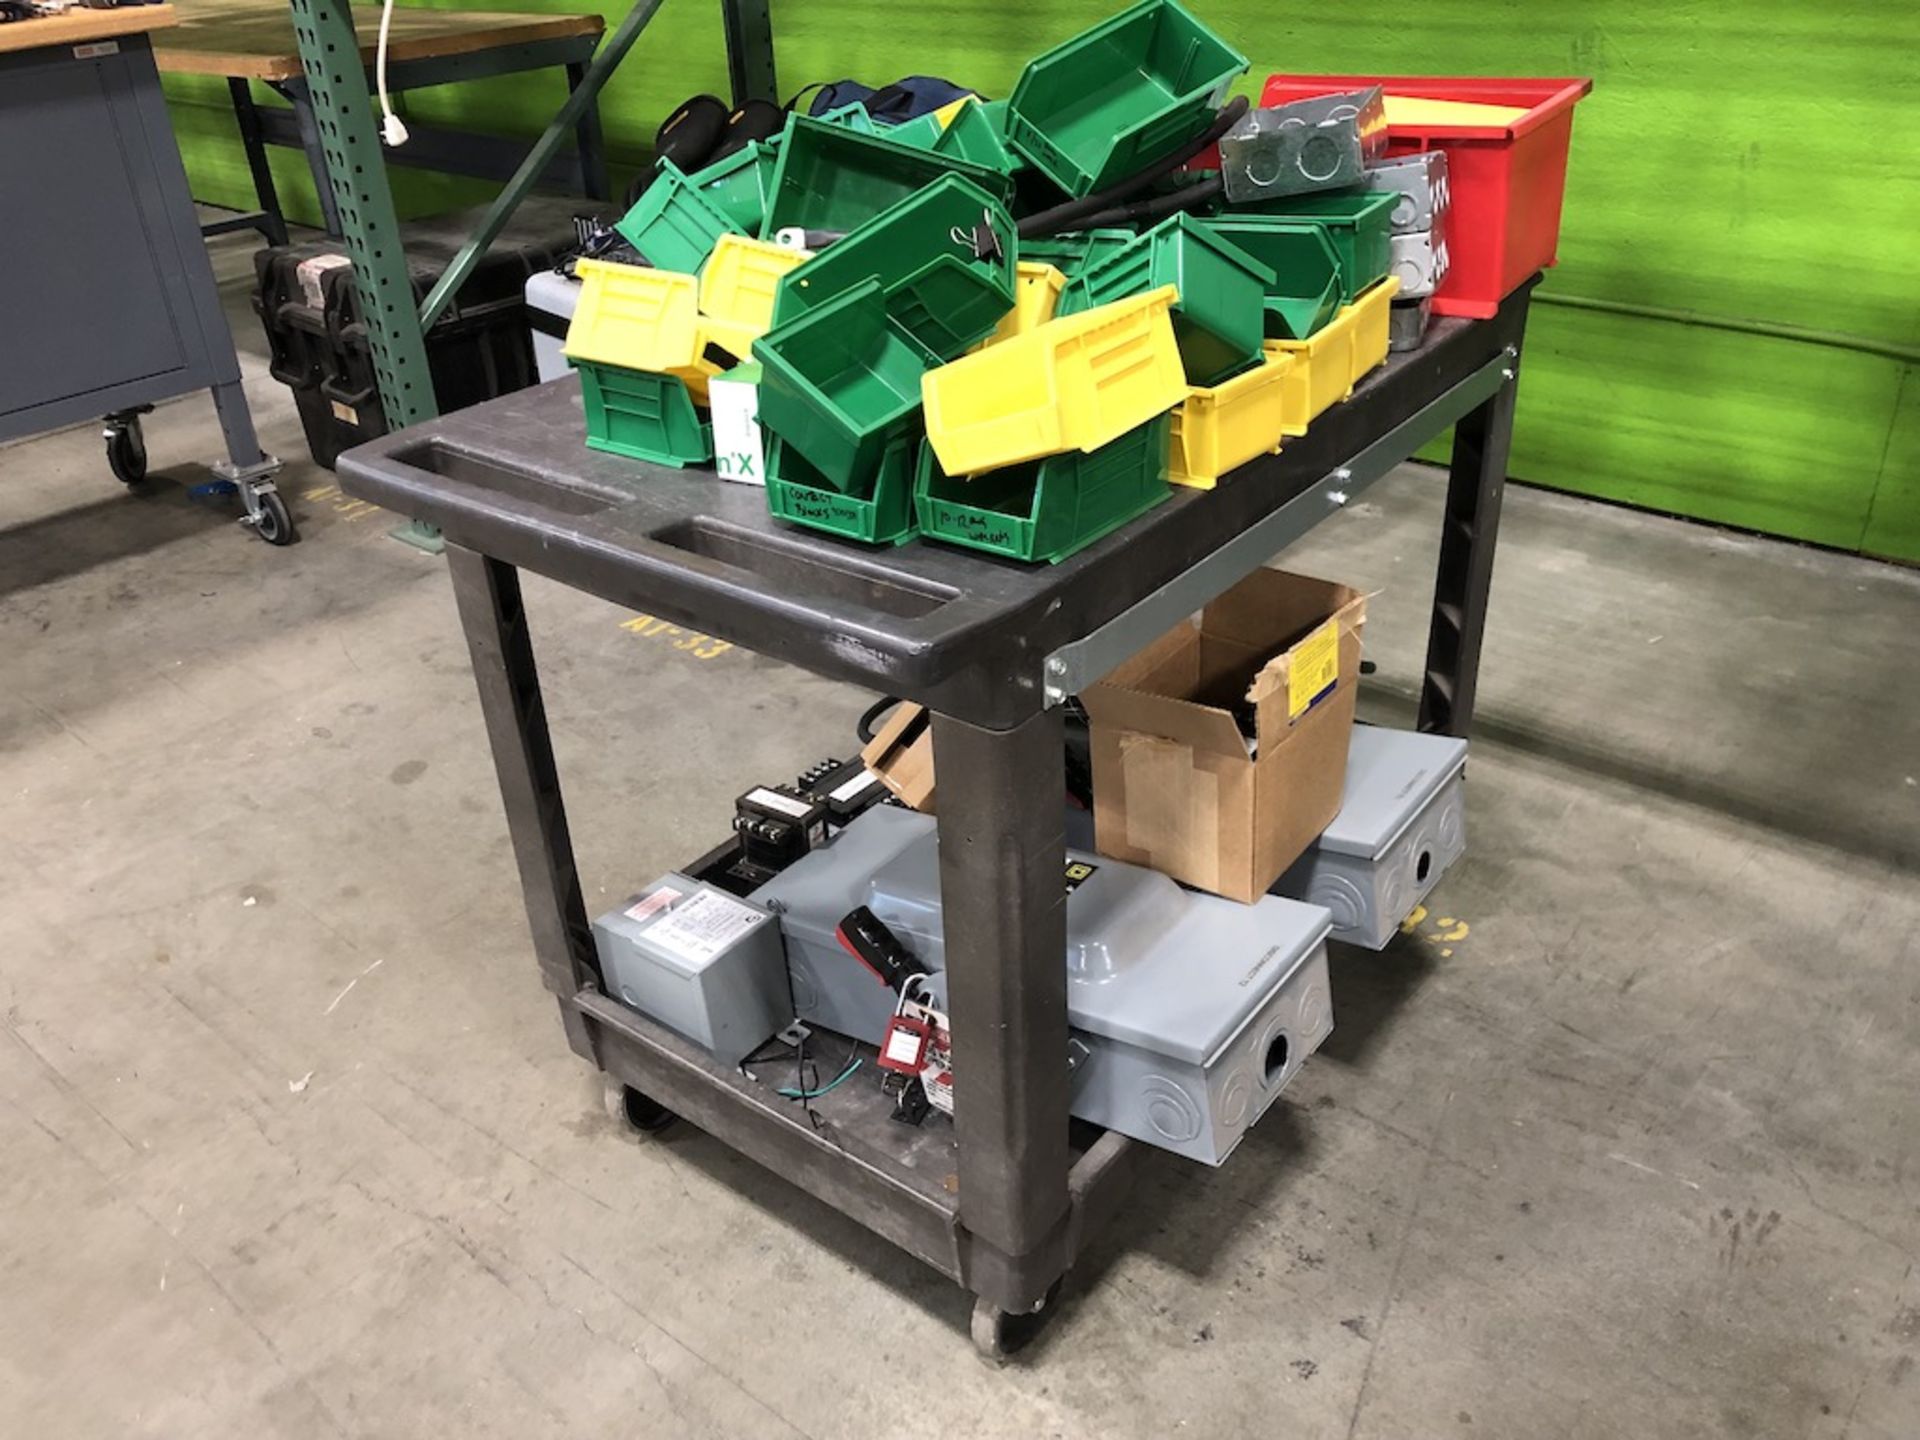 PLASTIC CART ( CONTNETS NOT INCLUDED ) 40IN L X 25 1/4IN W X 32IN H   SCHNEIDER ELECTRIC- 6611 - Image 3 of 4